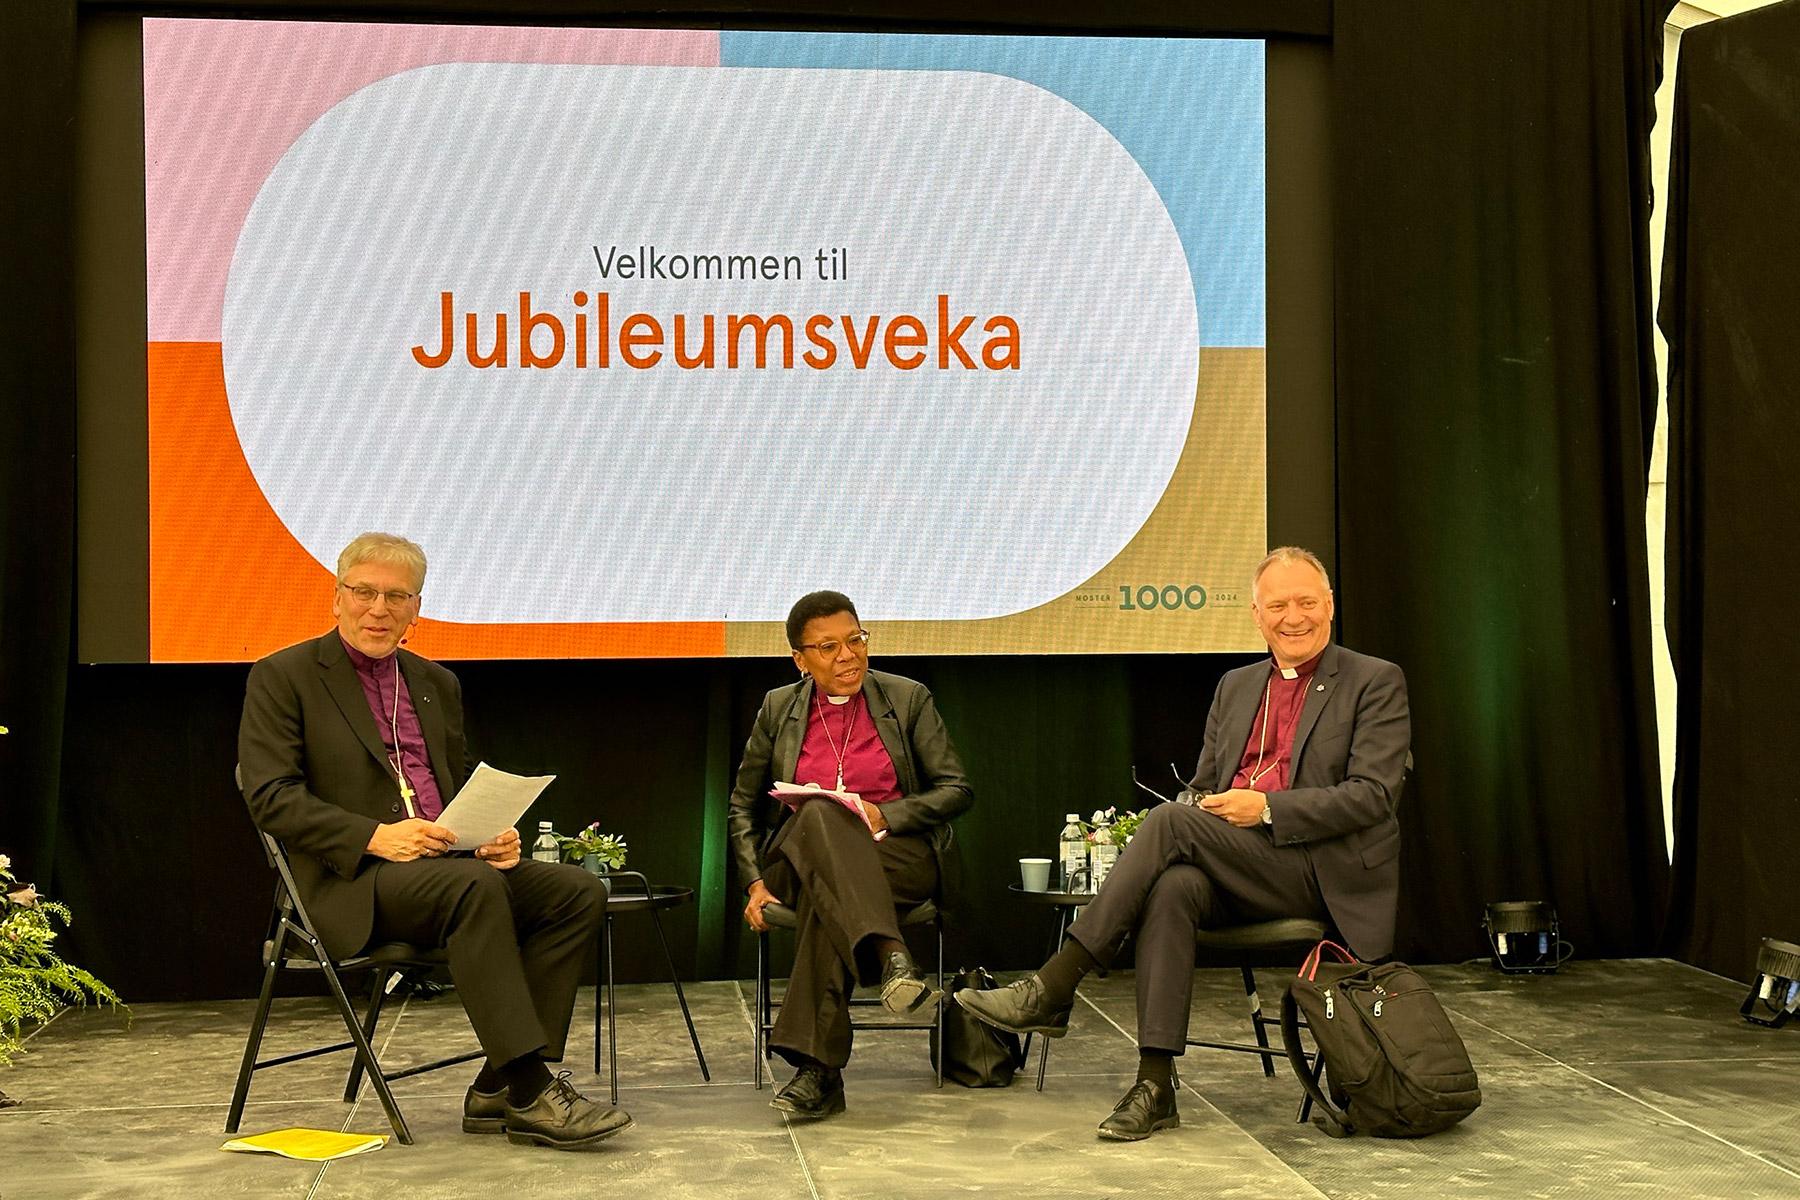 Panel discussion on “The values of the church” with (from left) the Presiding Bishop of the Church of Norway, Olav Fykse Tveit, Anglican Bishop Rosemarie Mallett from the Diocese of Southwark, United Kingdom, and LWF President Henrik Stubkjær. Photo: LWF/I. Lucas